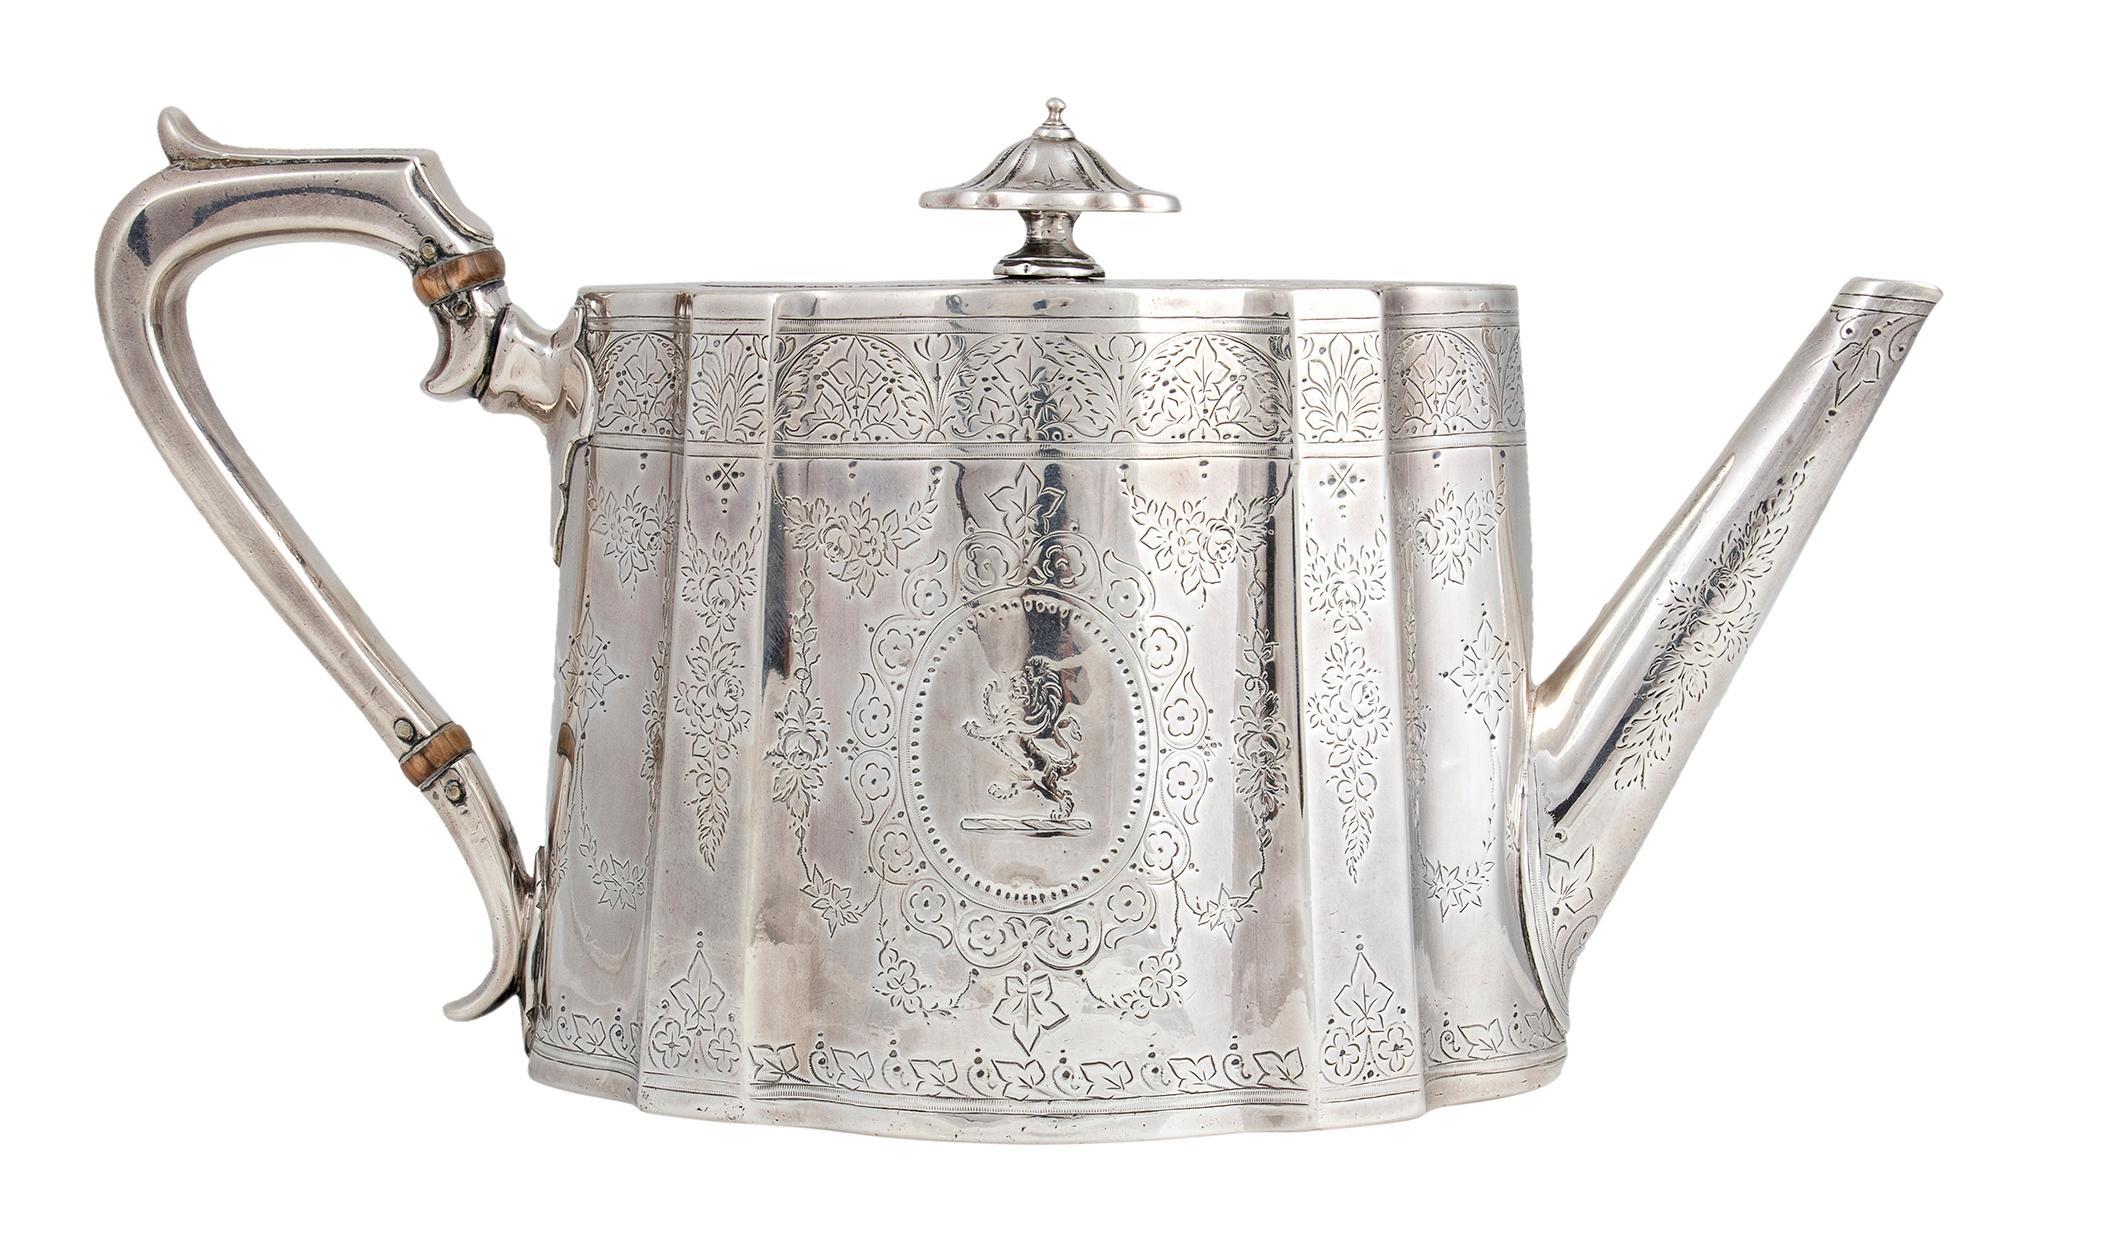 This Victorian silver teapot is a very refined silver item, realized in London in 1871.

Made of 925/1000 silver.

You may see neoclassical style decorations, with body, handle and spout finely light cut engraved with floral decorations. On the